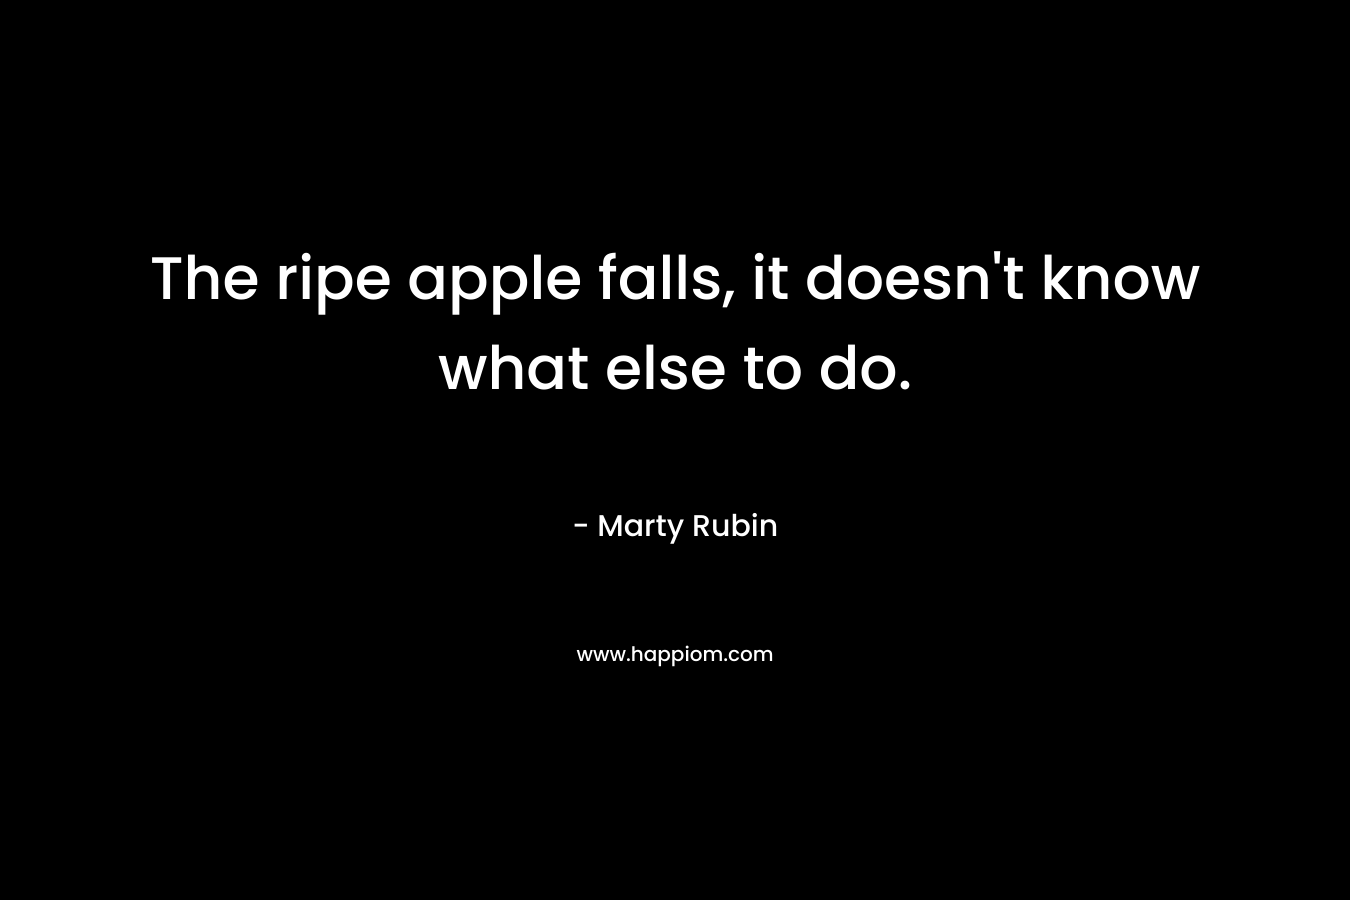 The ripe apple falls, it doesn't know what else to do.